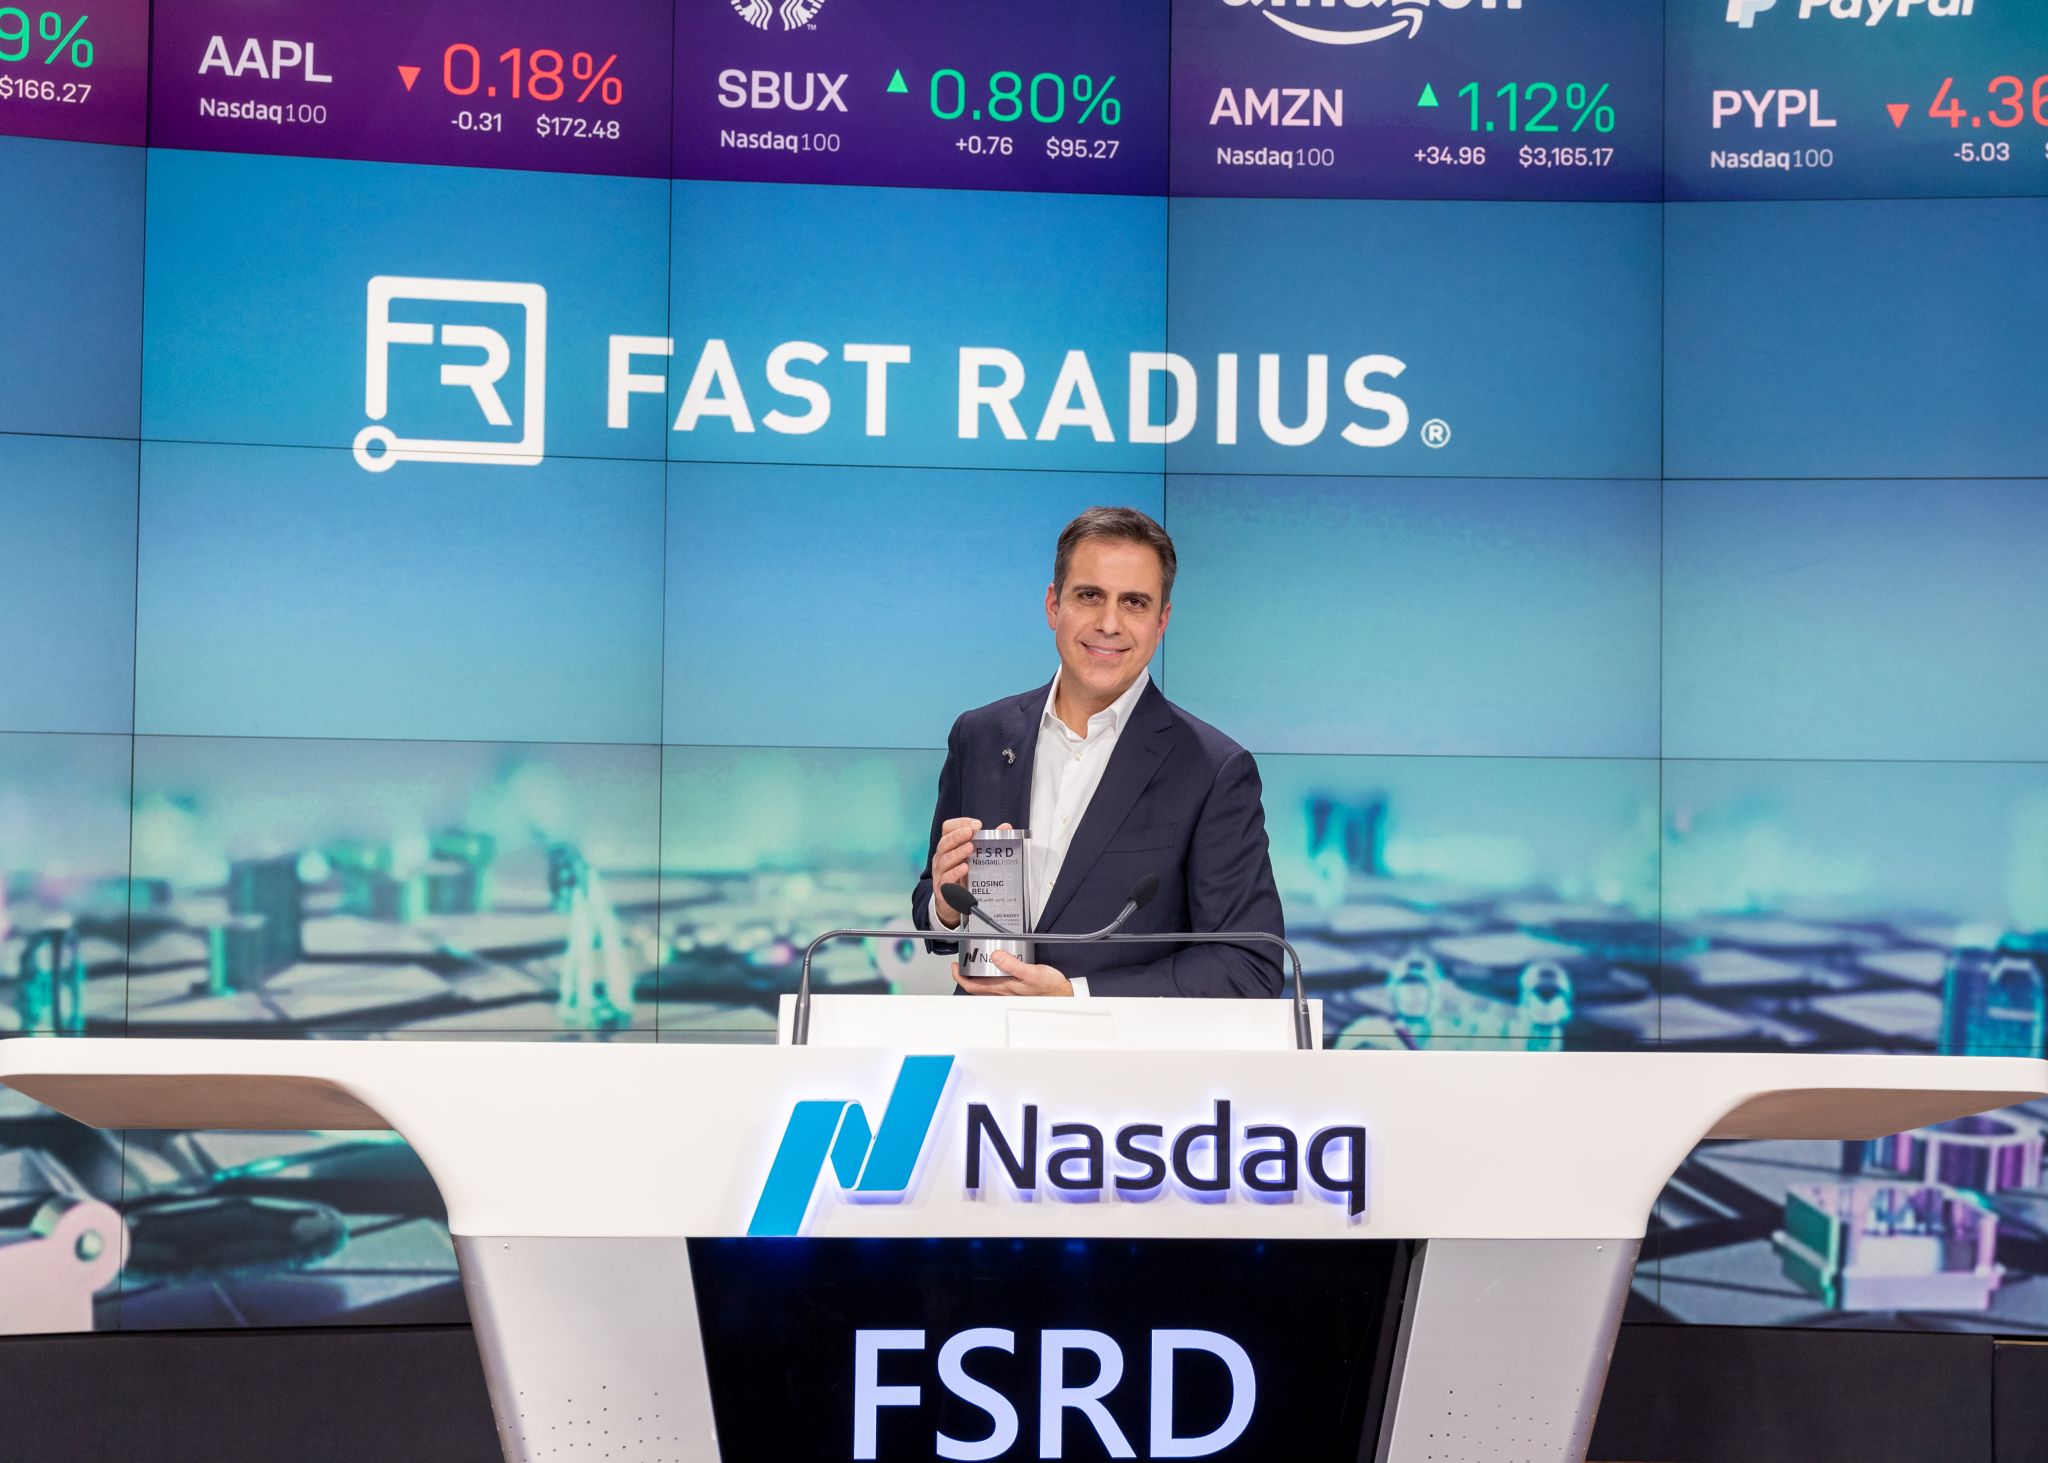 Fast Radius co-founder and CEO Lou Rassey rings Nasdaq bell.